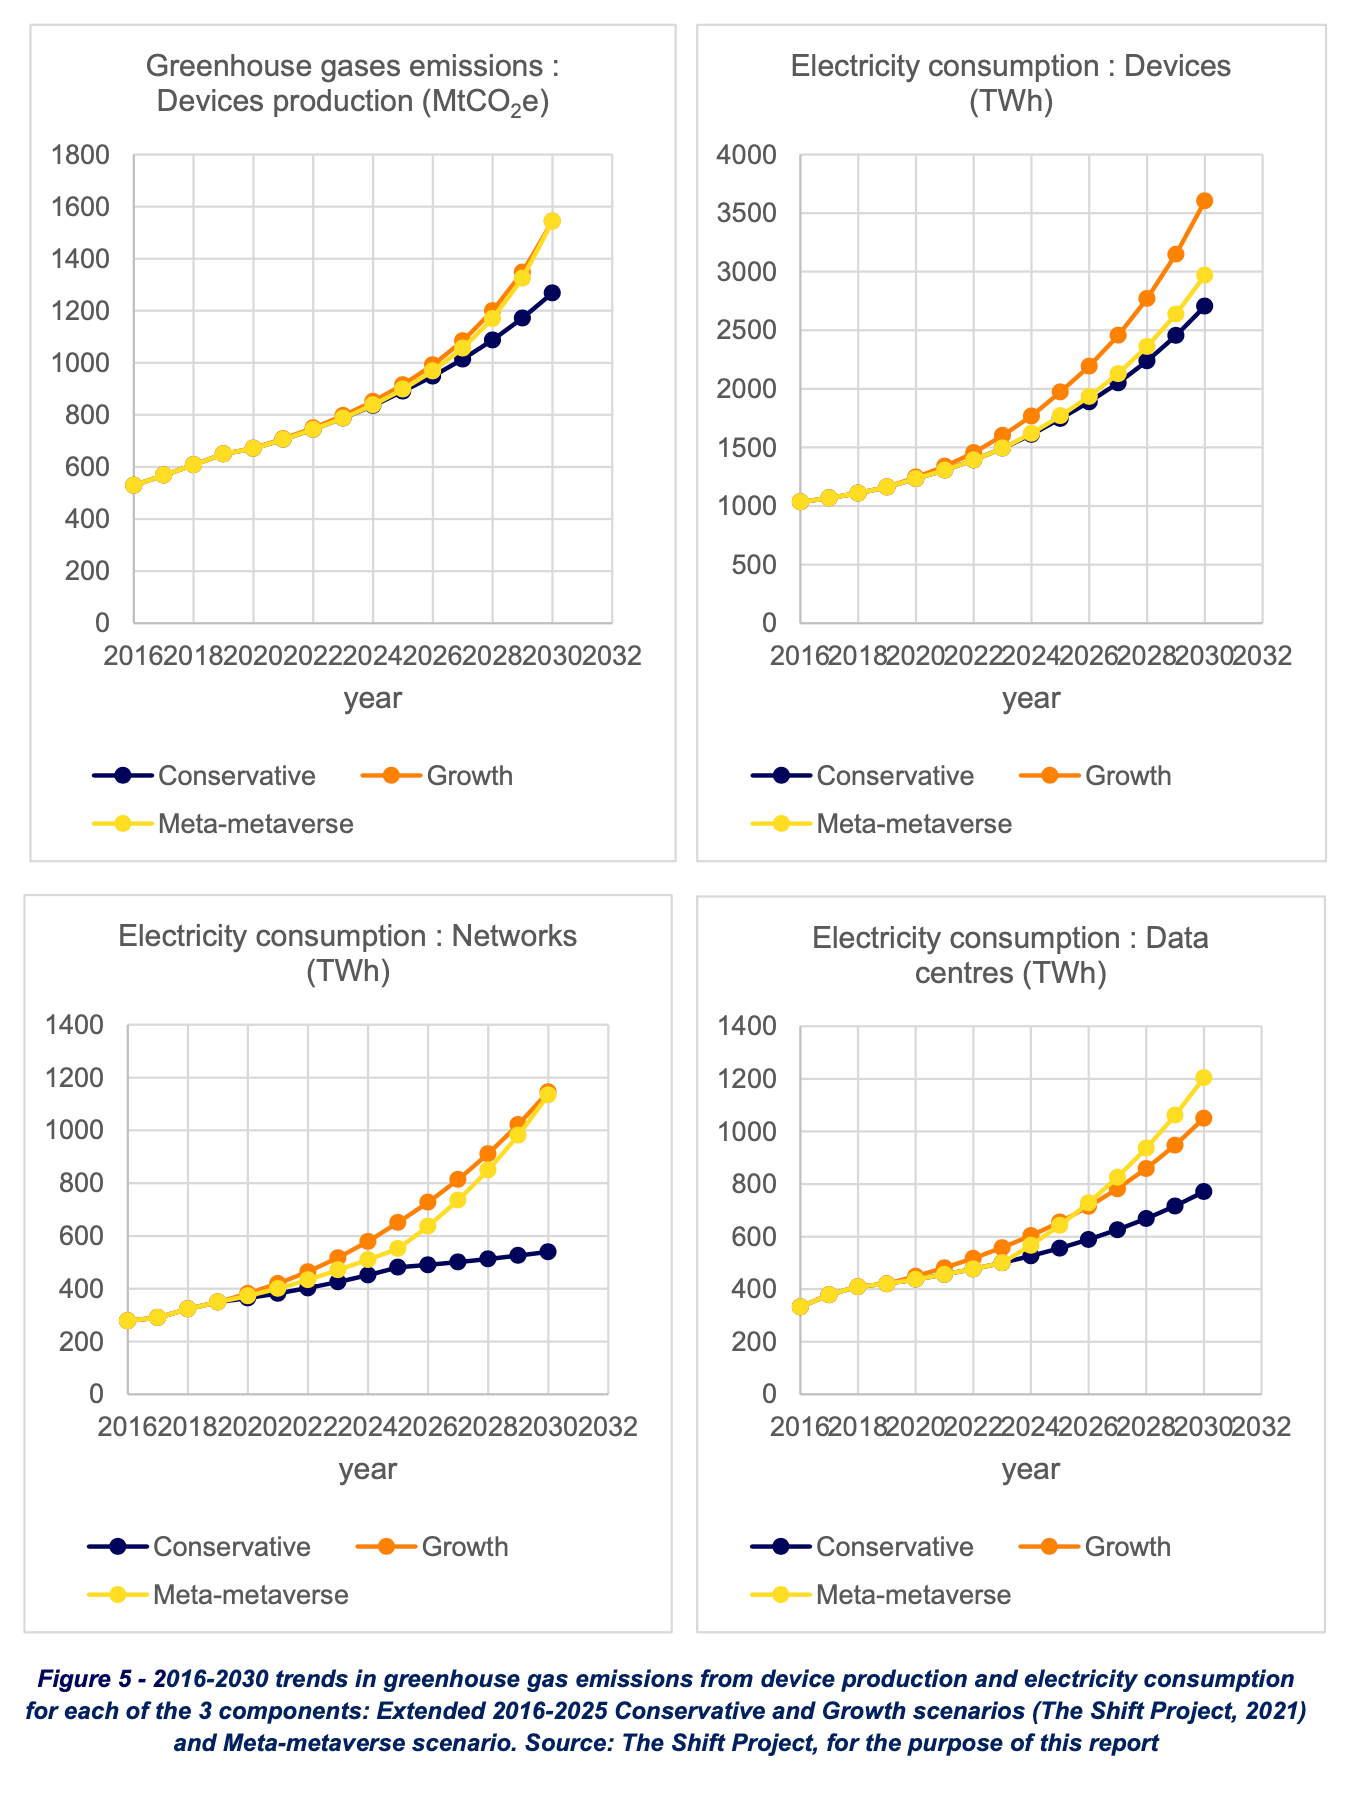 Big-picture trends from 2023 in games, and unsustainable emissions trajectories